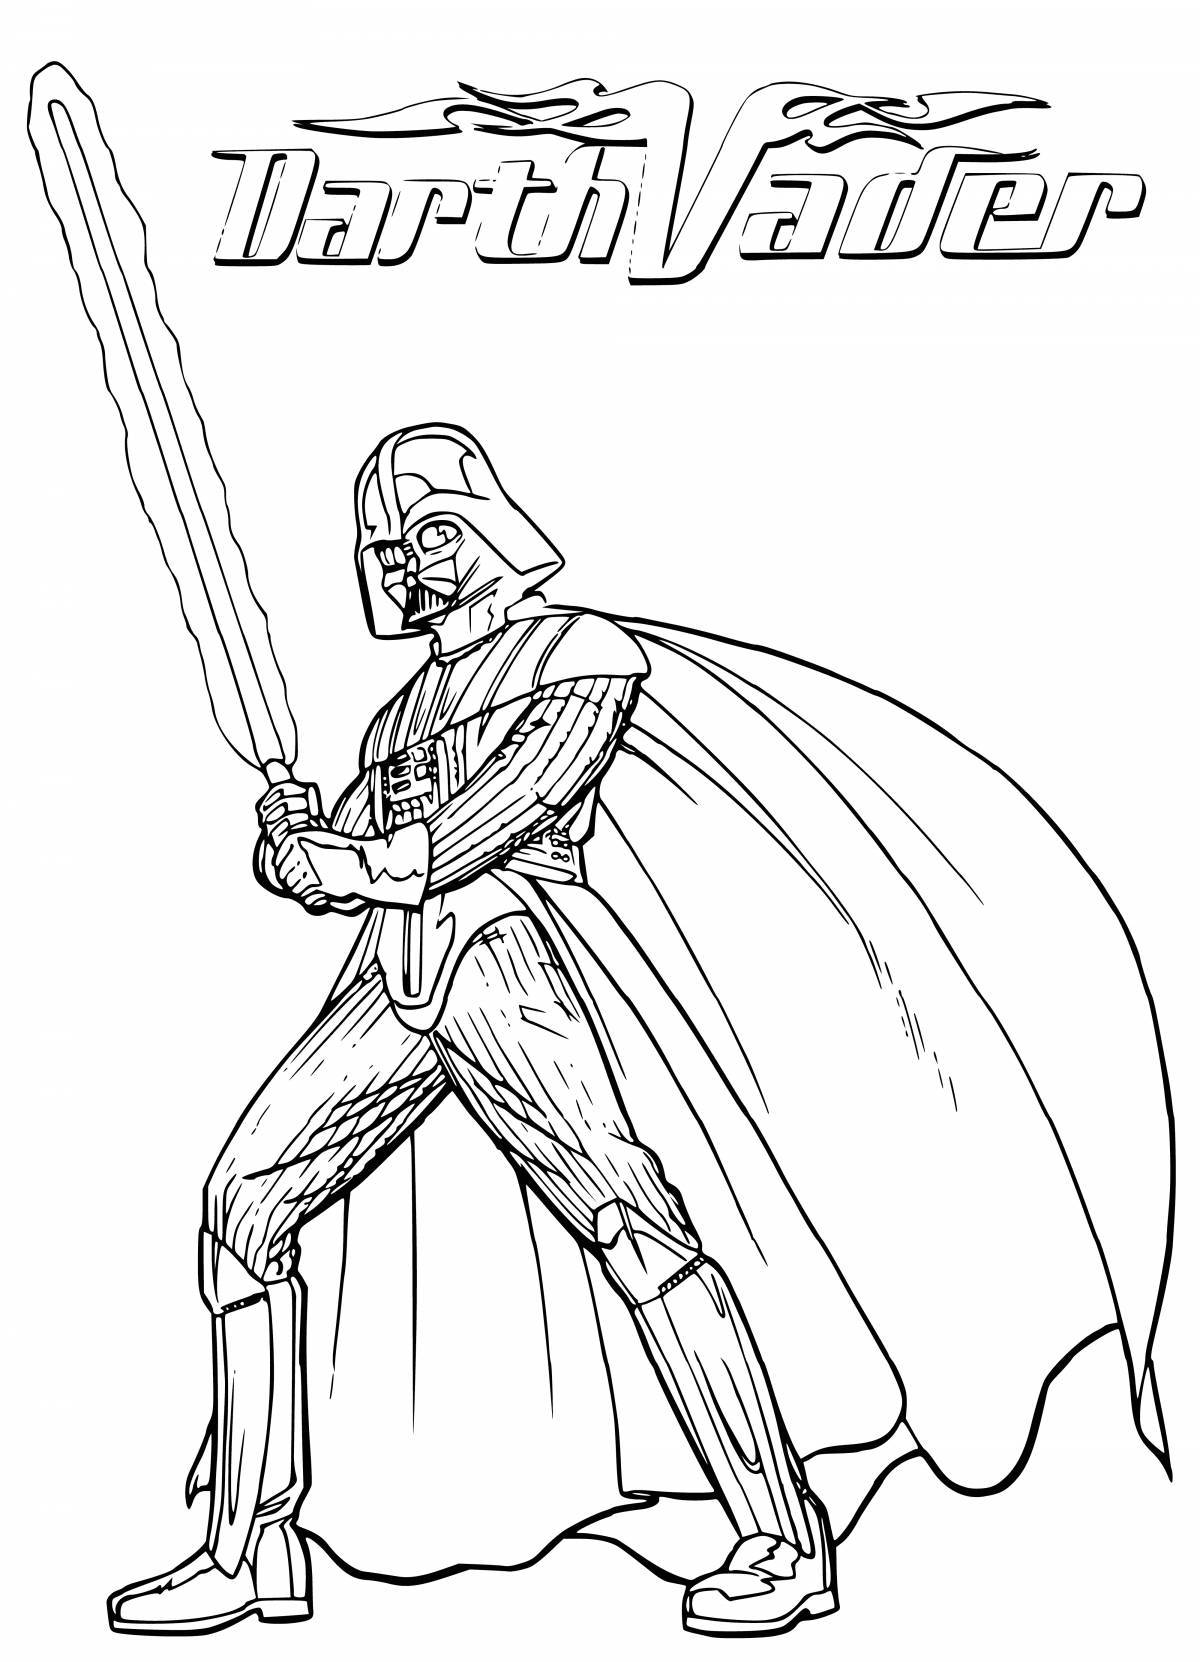 Darth Vader's scary coloring page